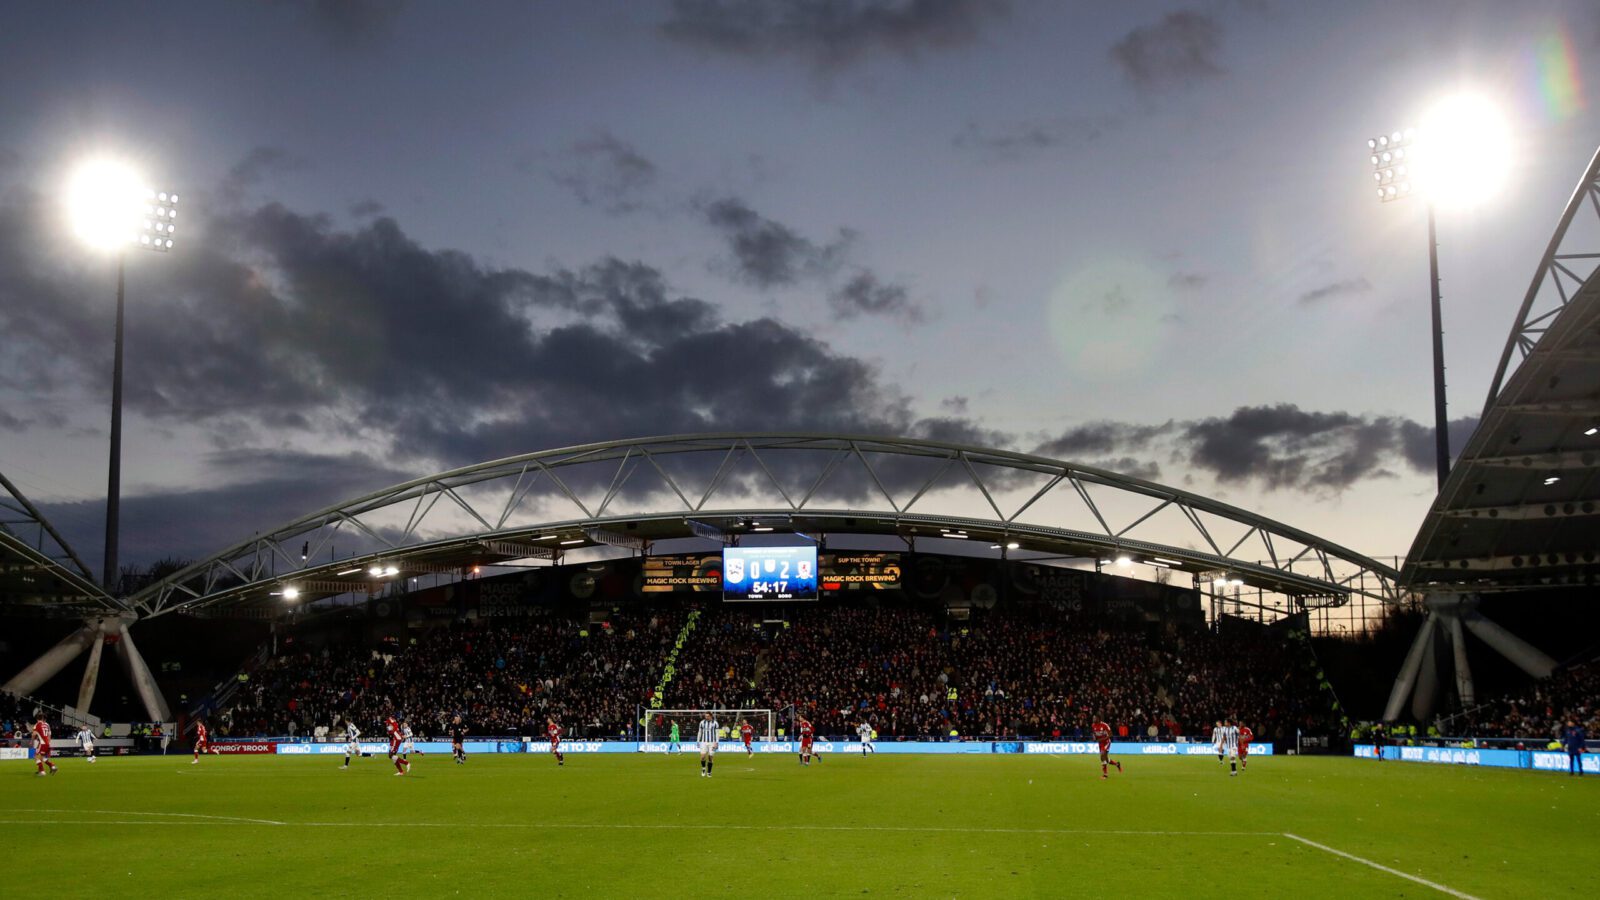 Huddersfield vs West Brom Prediction: Tenacious Terriers can stand firm